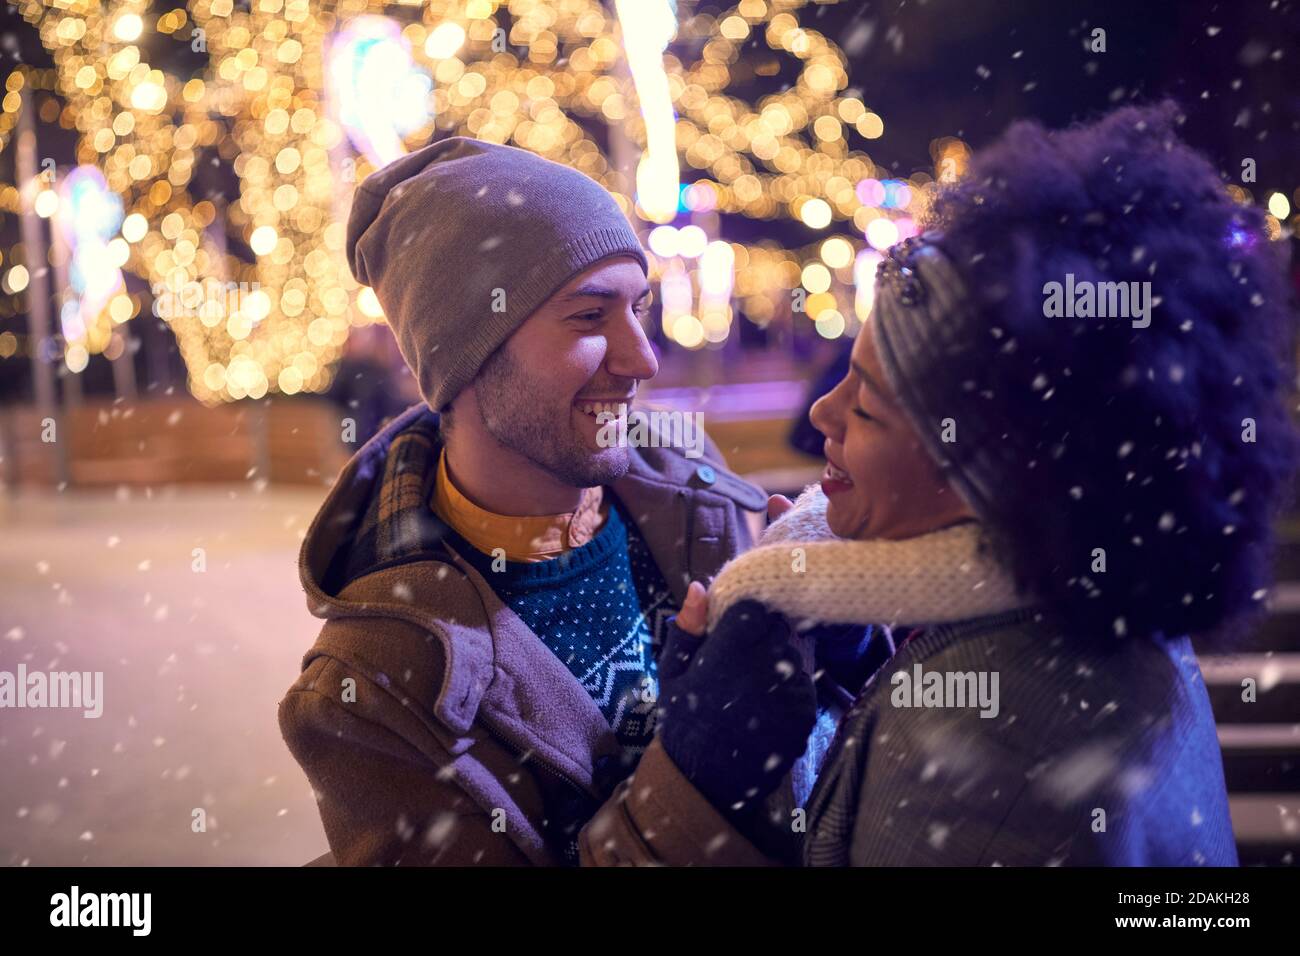 A young couple in romantic moments at ice rink on a beautiful night. Skating, closeness, love, together Stock Photo